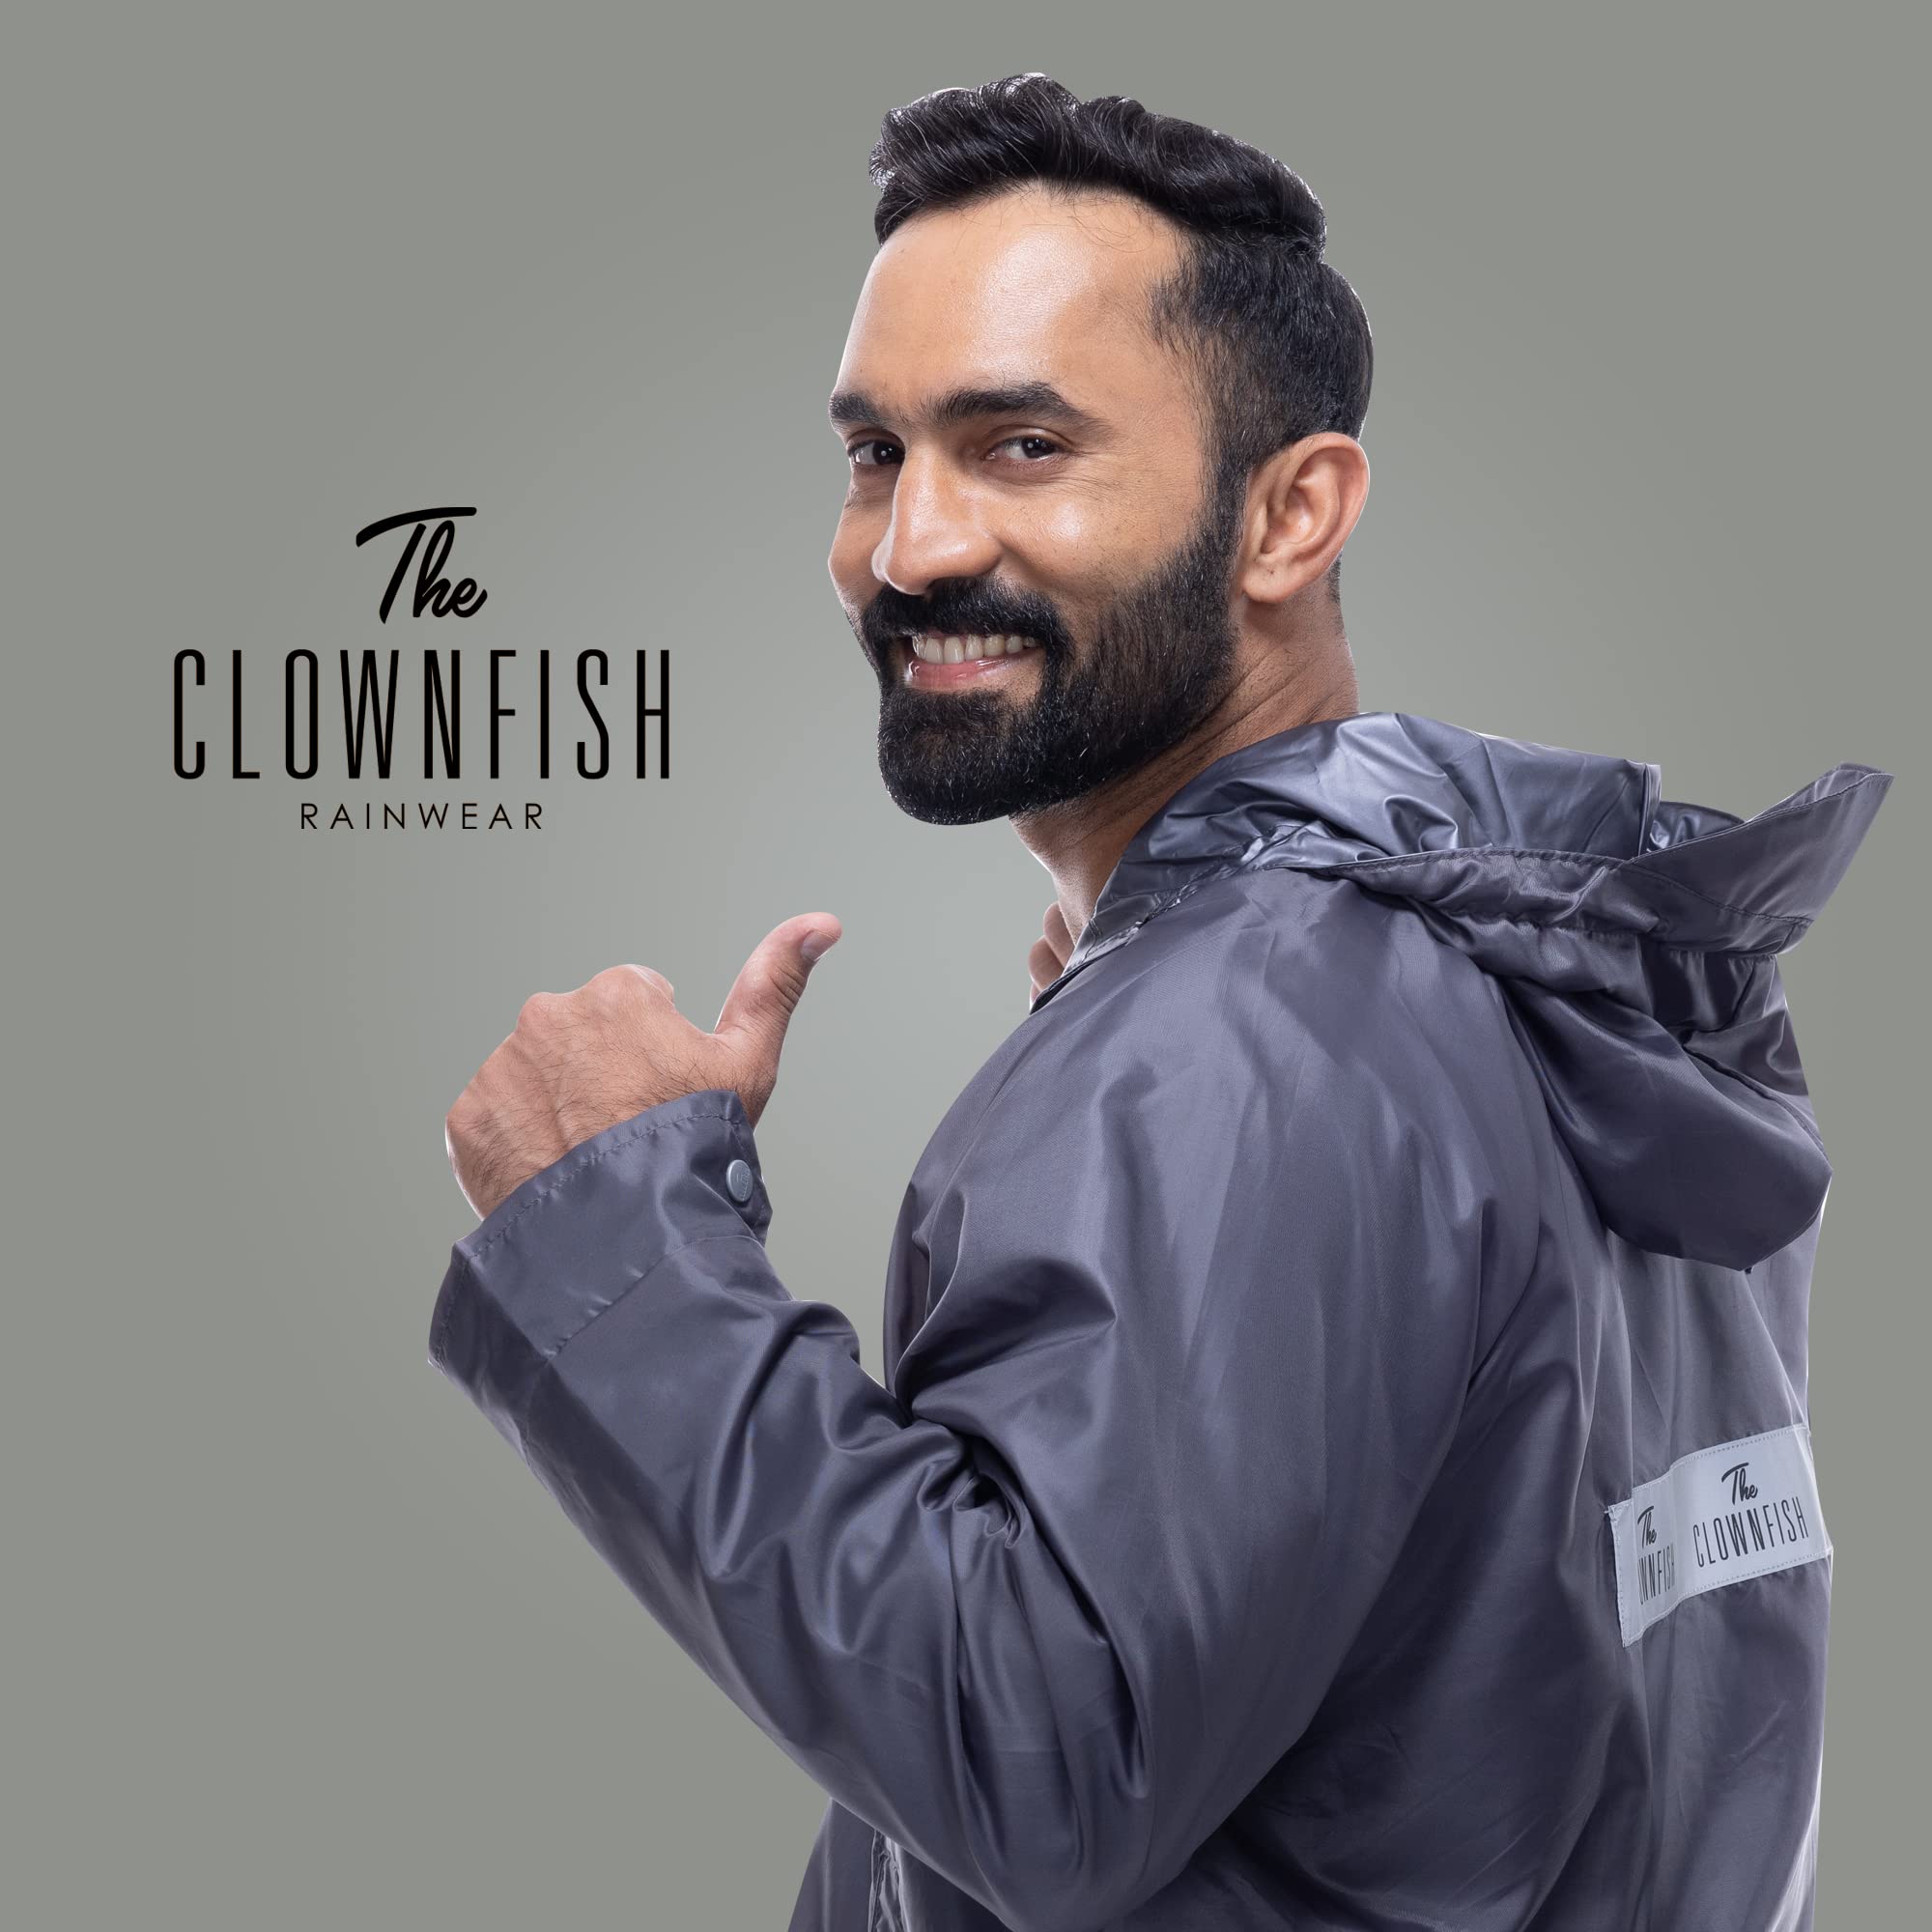 THE CLOWNFISH Bruce Series Men's Waterproof Polyester Raincoat with Hood and Reflector Logo at Back for Night Travelling. Set of Top and Bottom. Printed Plastic Pouch with Rope (Black, X-Large)